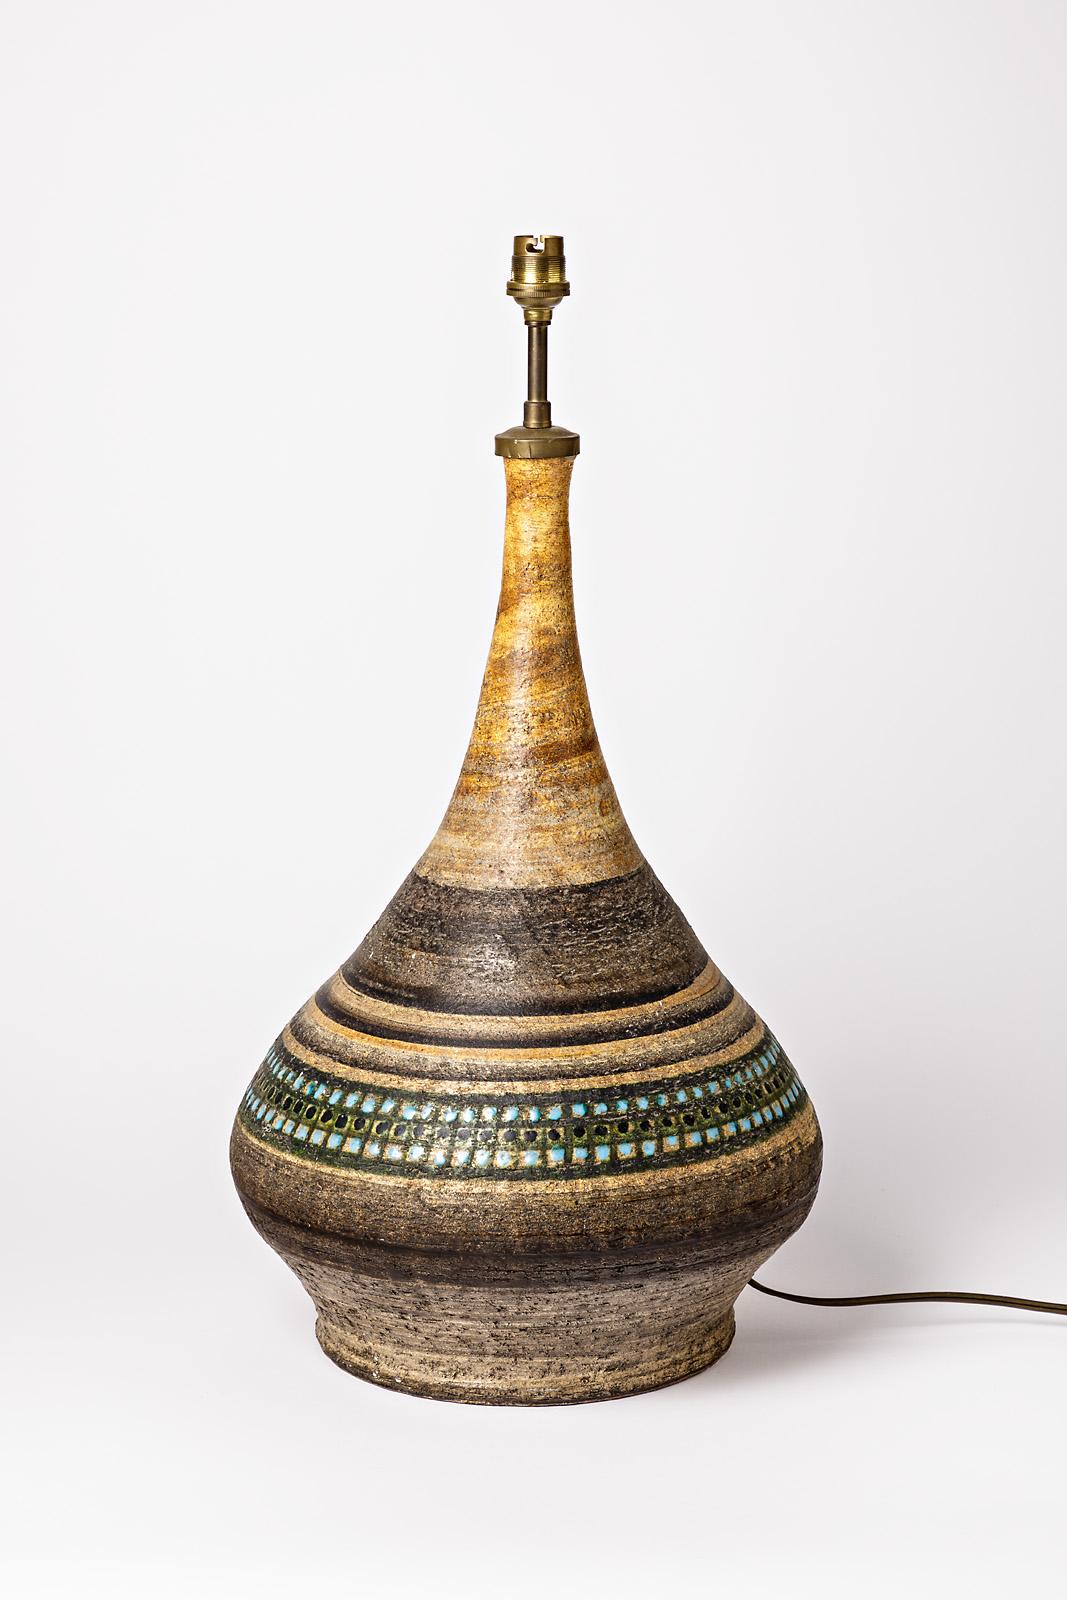 Beaux Arts Big Ceramic Lamp Attributed to Raphael Giarusso, to Vallauris, circa 1960-1970 For Sale